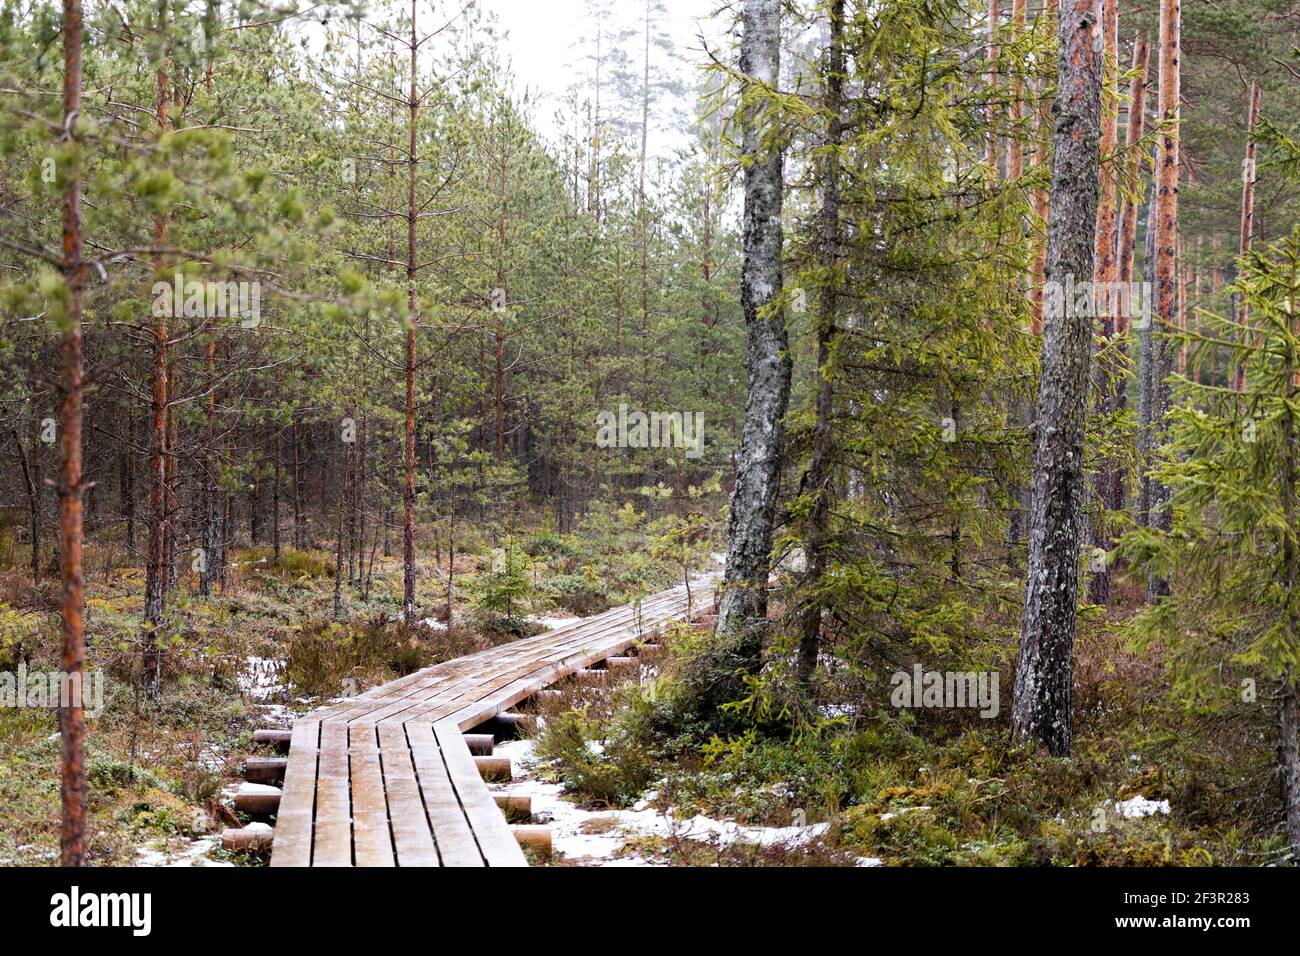 View of woods in a natural park with wooden pathway. Stock Photo